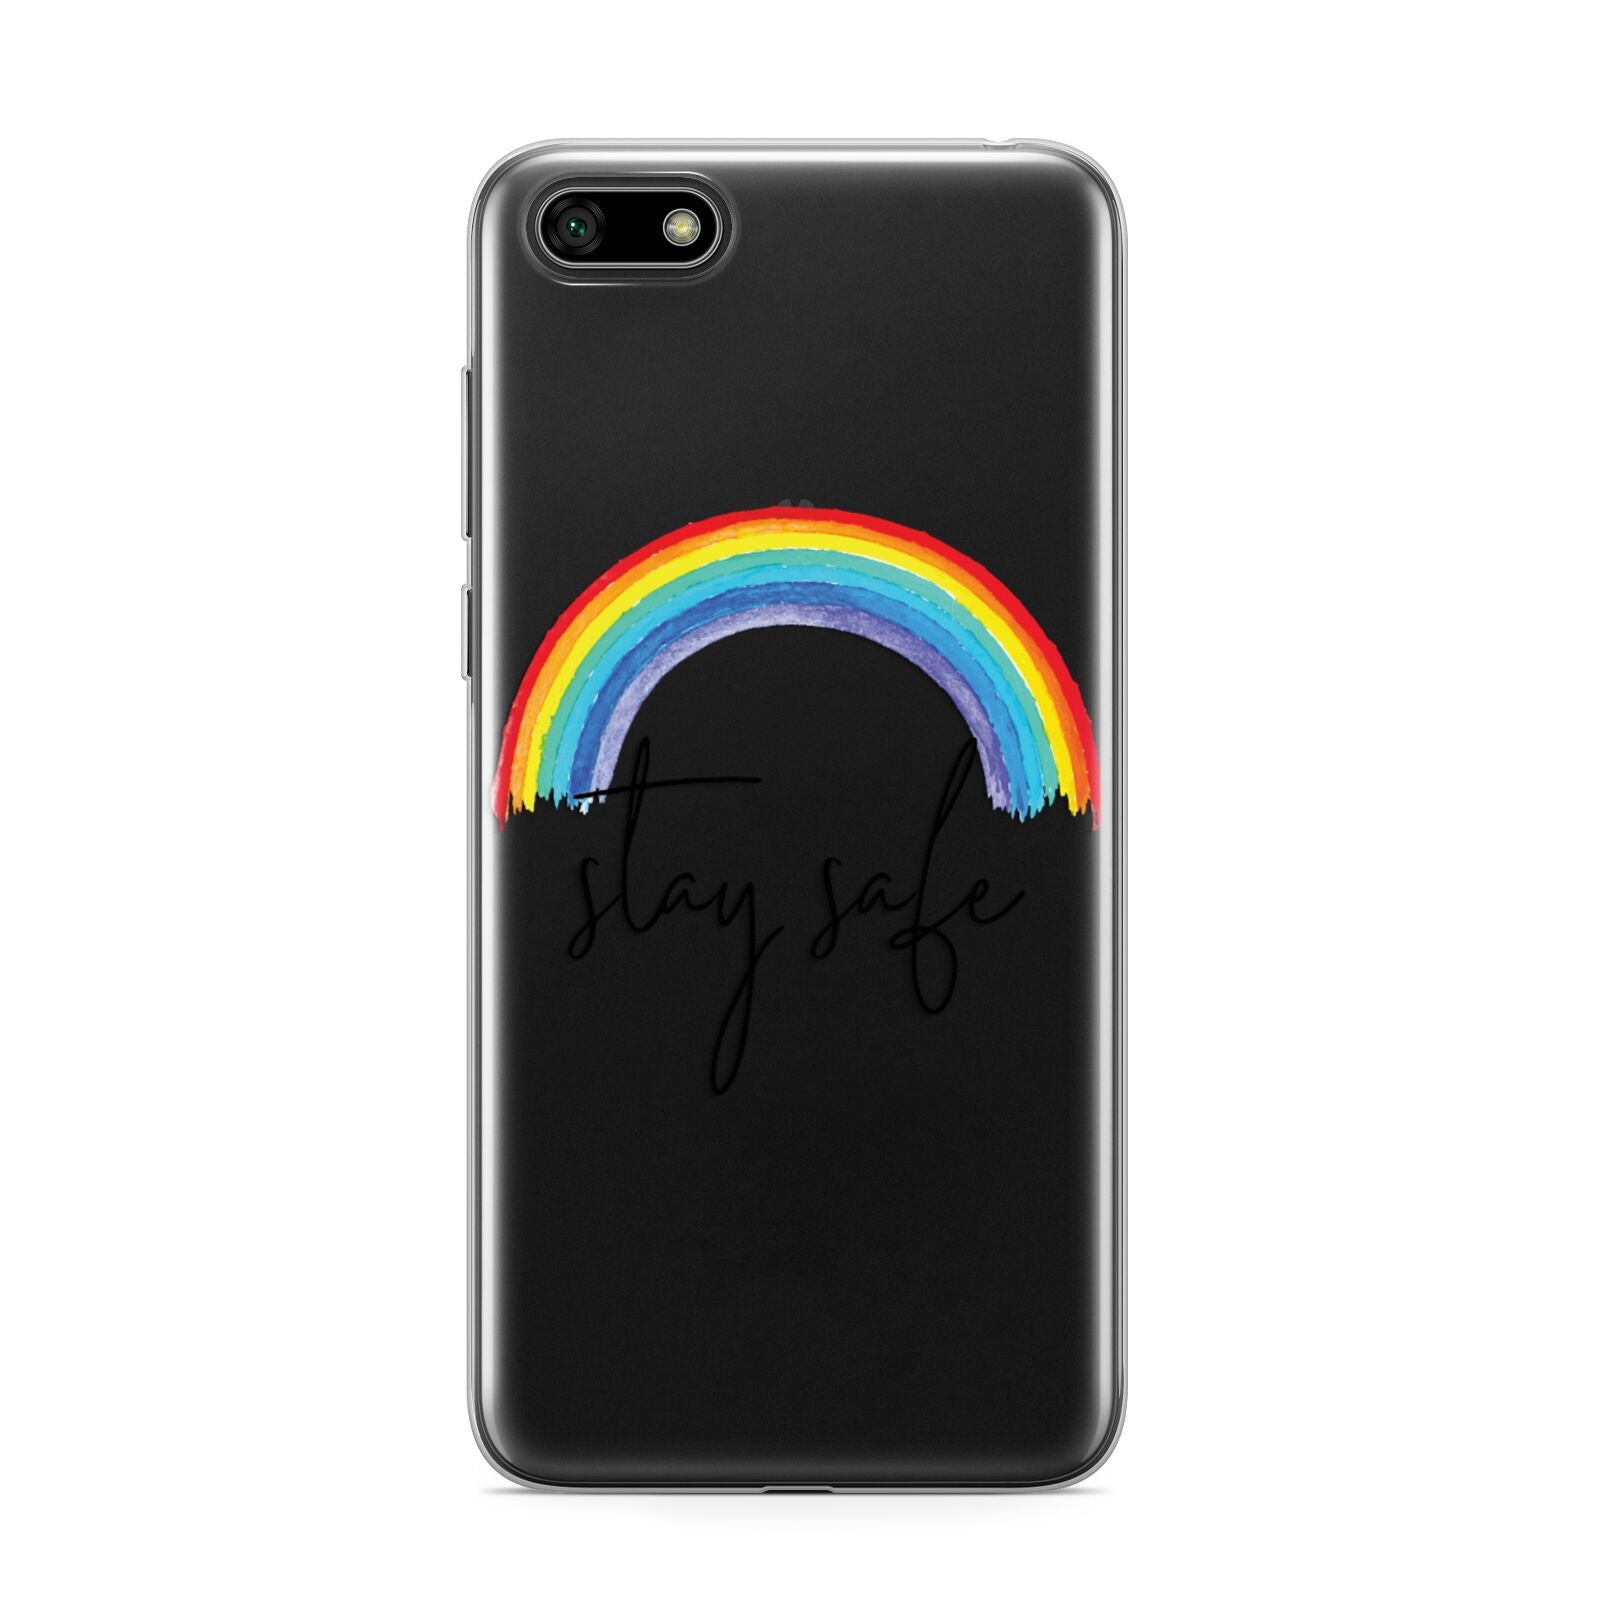 Stay Safe Rainbow Huawei Y5 Prime 2018 Phone Case